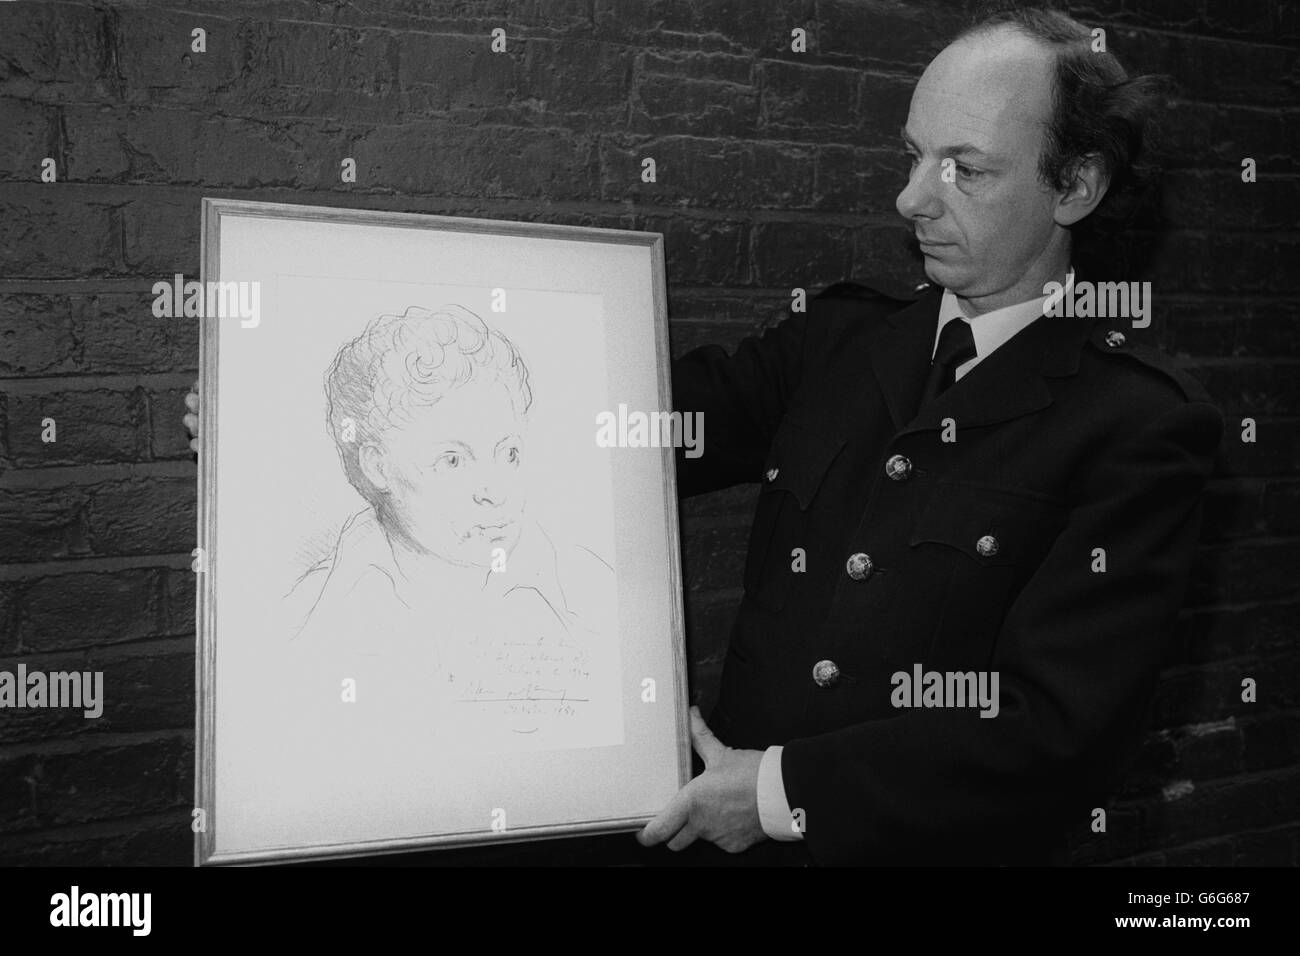 An usher at the Duke of York's Theatre, London, holds Mervyn Levy's portrait of the late Welsh poet Dylan Thomas. It is due to be auctioned at the theatre by Sir Huw Wheldon during the Dylan Thomas Celebration Concert to raise funds for the installation of a plaque to Dylan Thomas in Poets Corner at Westminster Abbey. Stock Photo